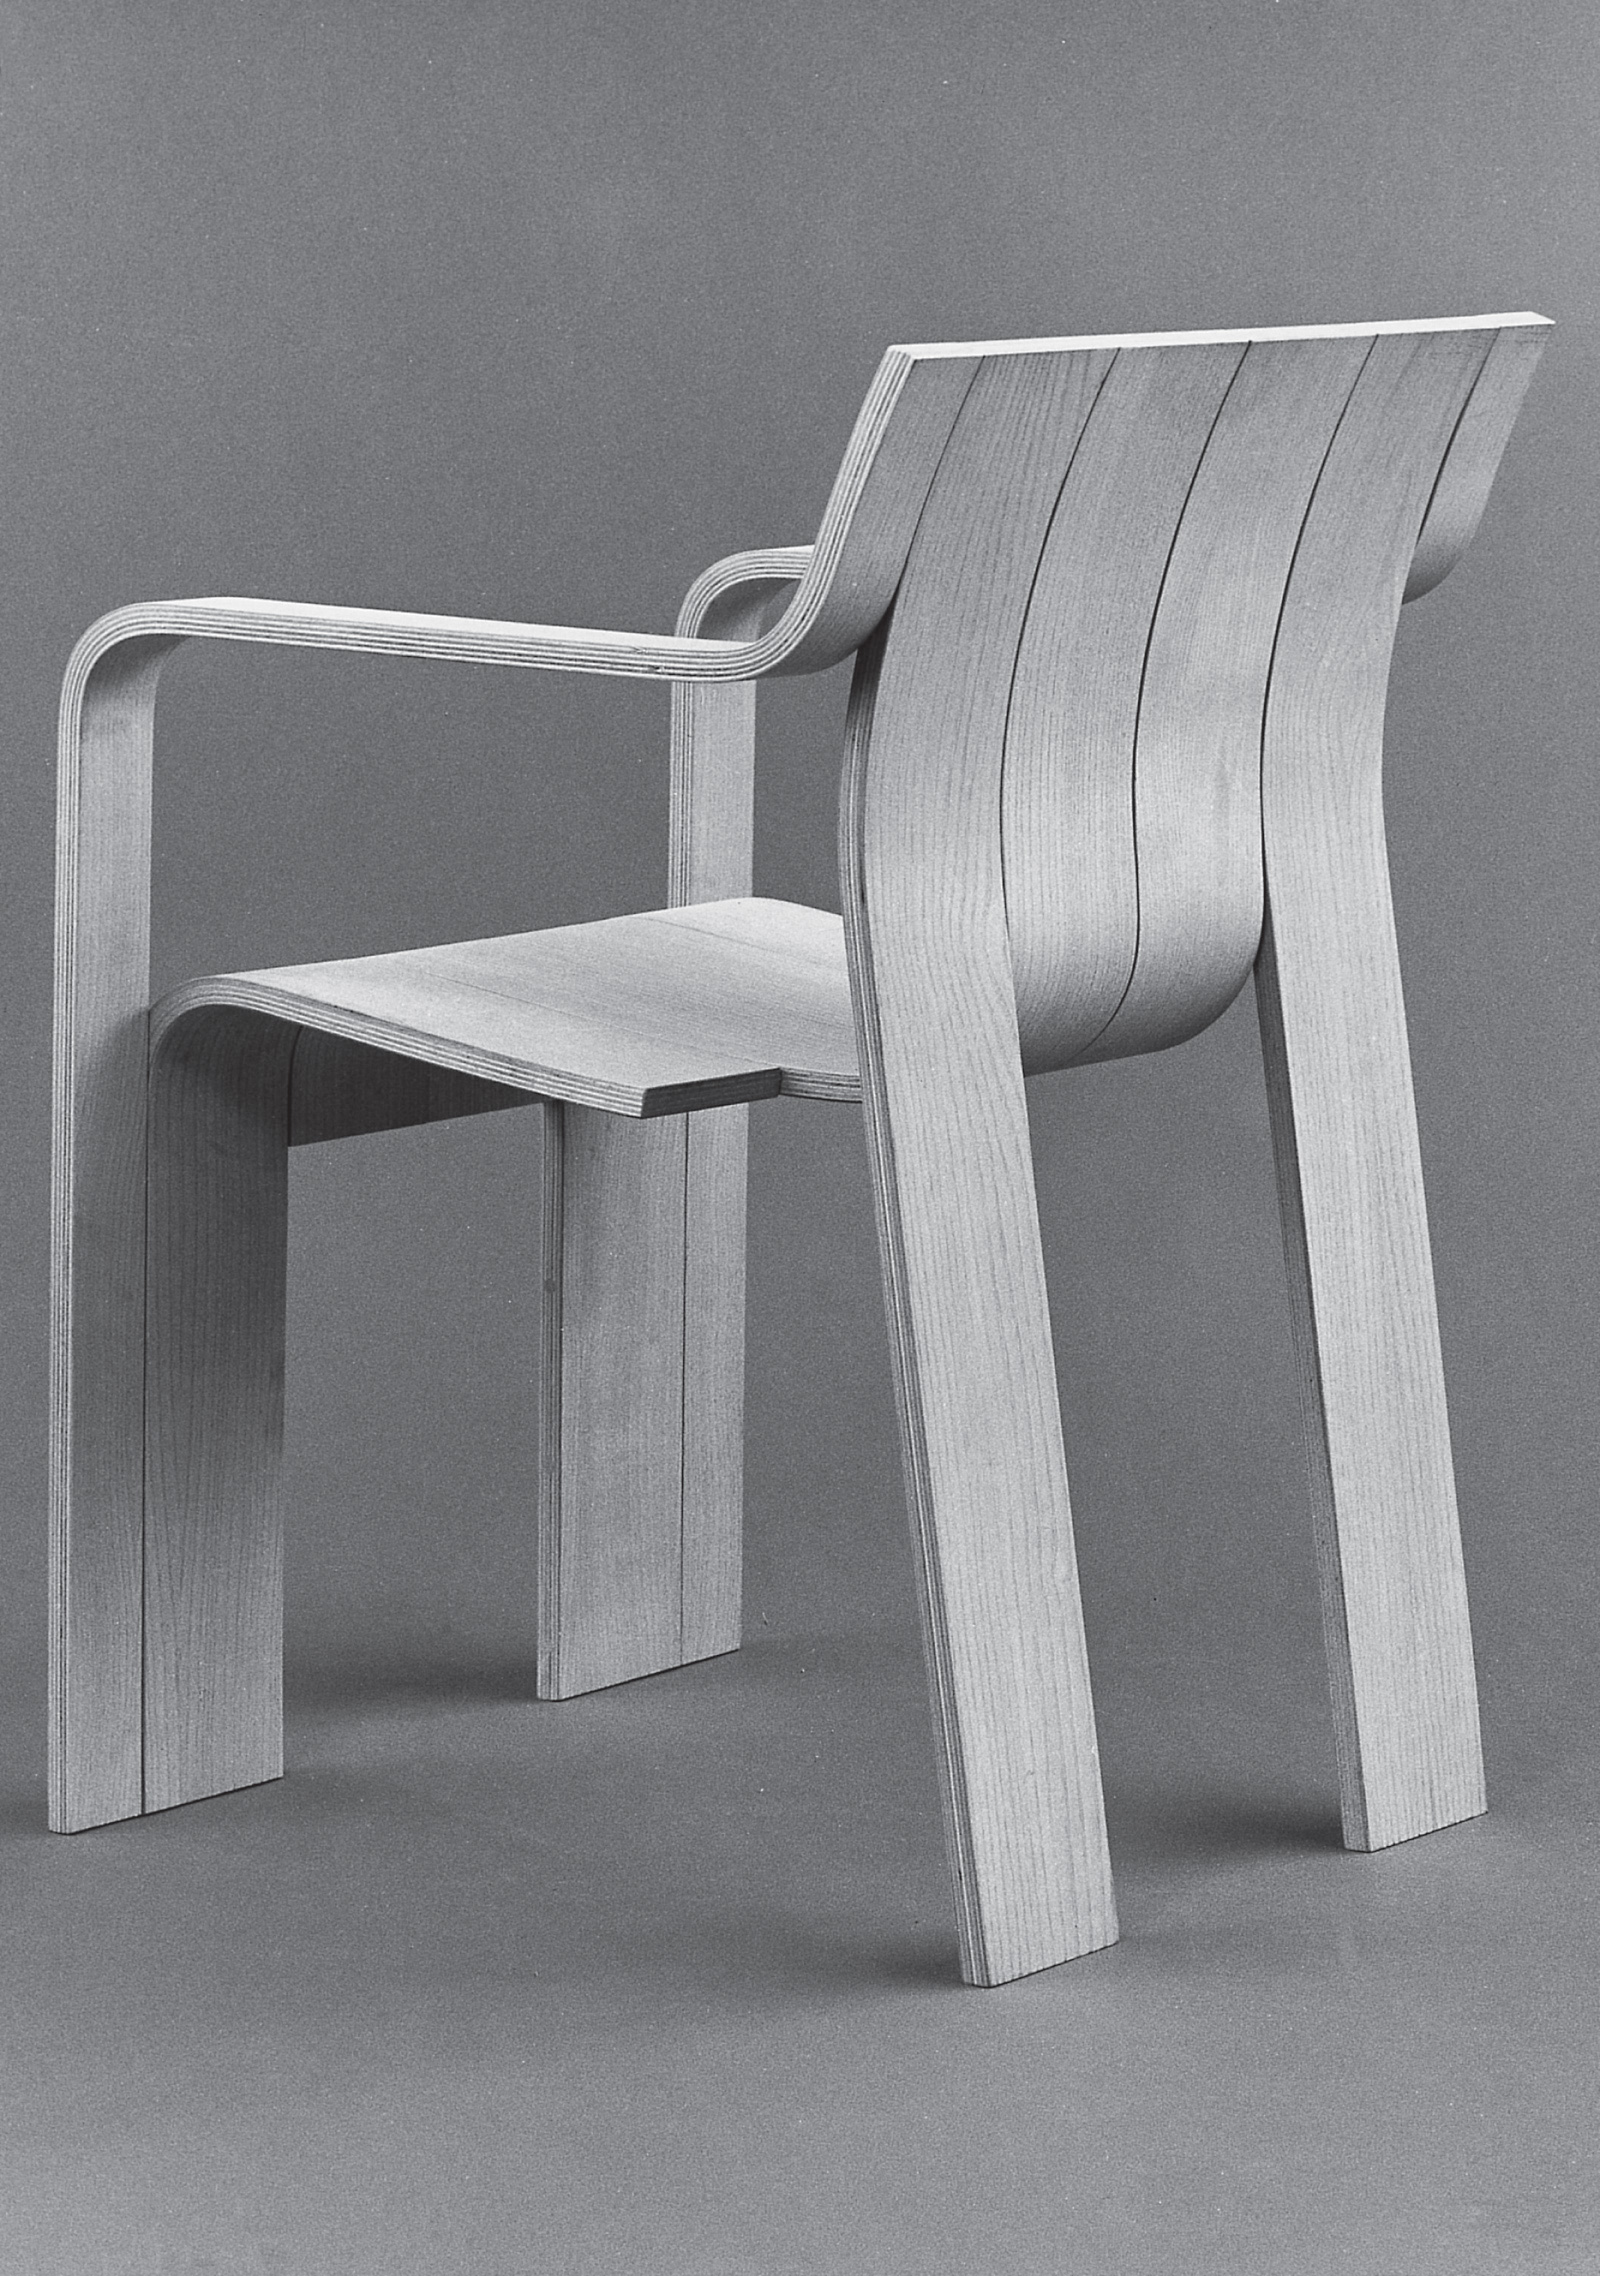 Strip chair with arms